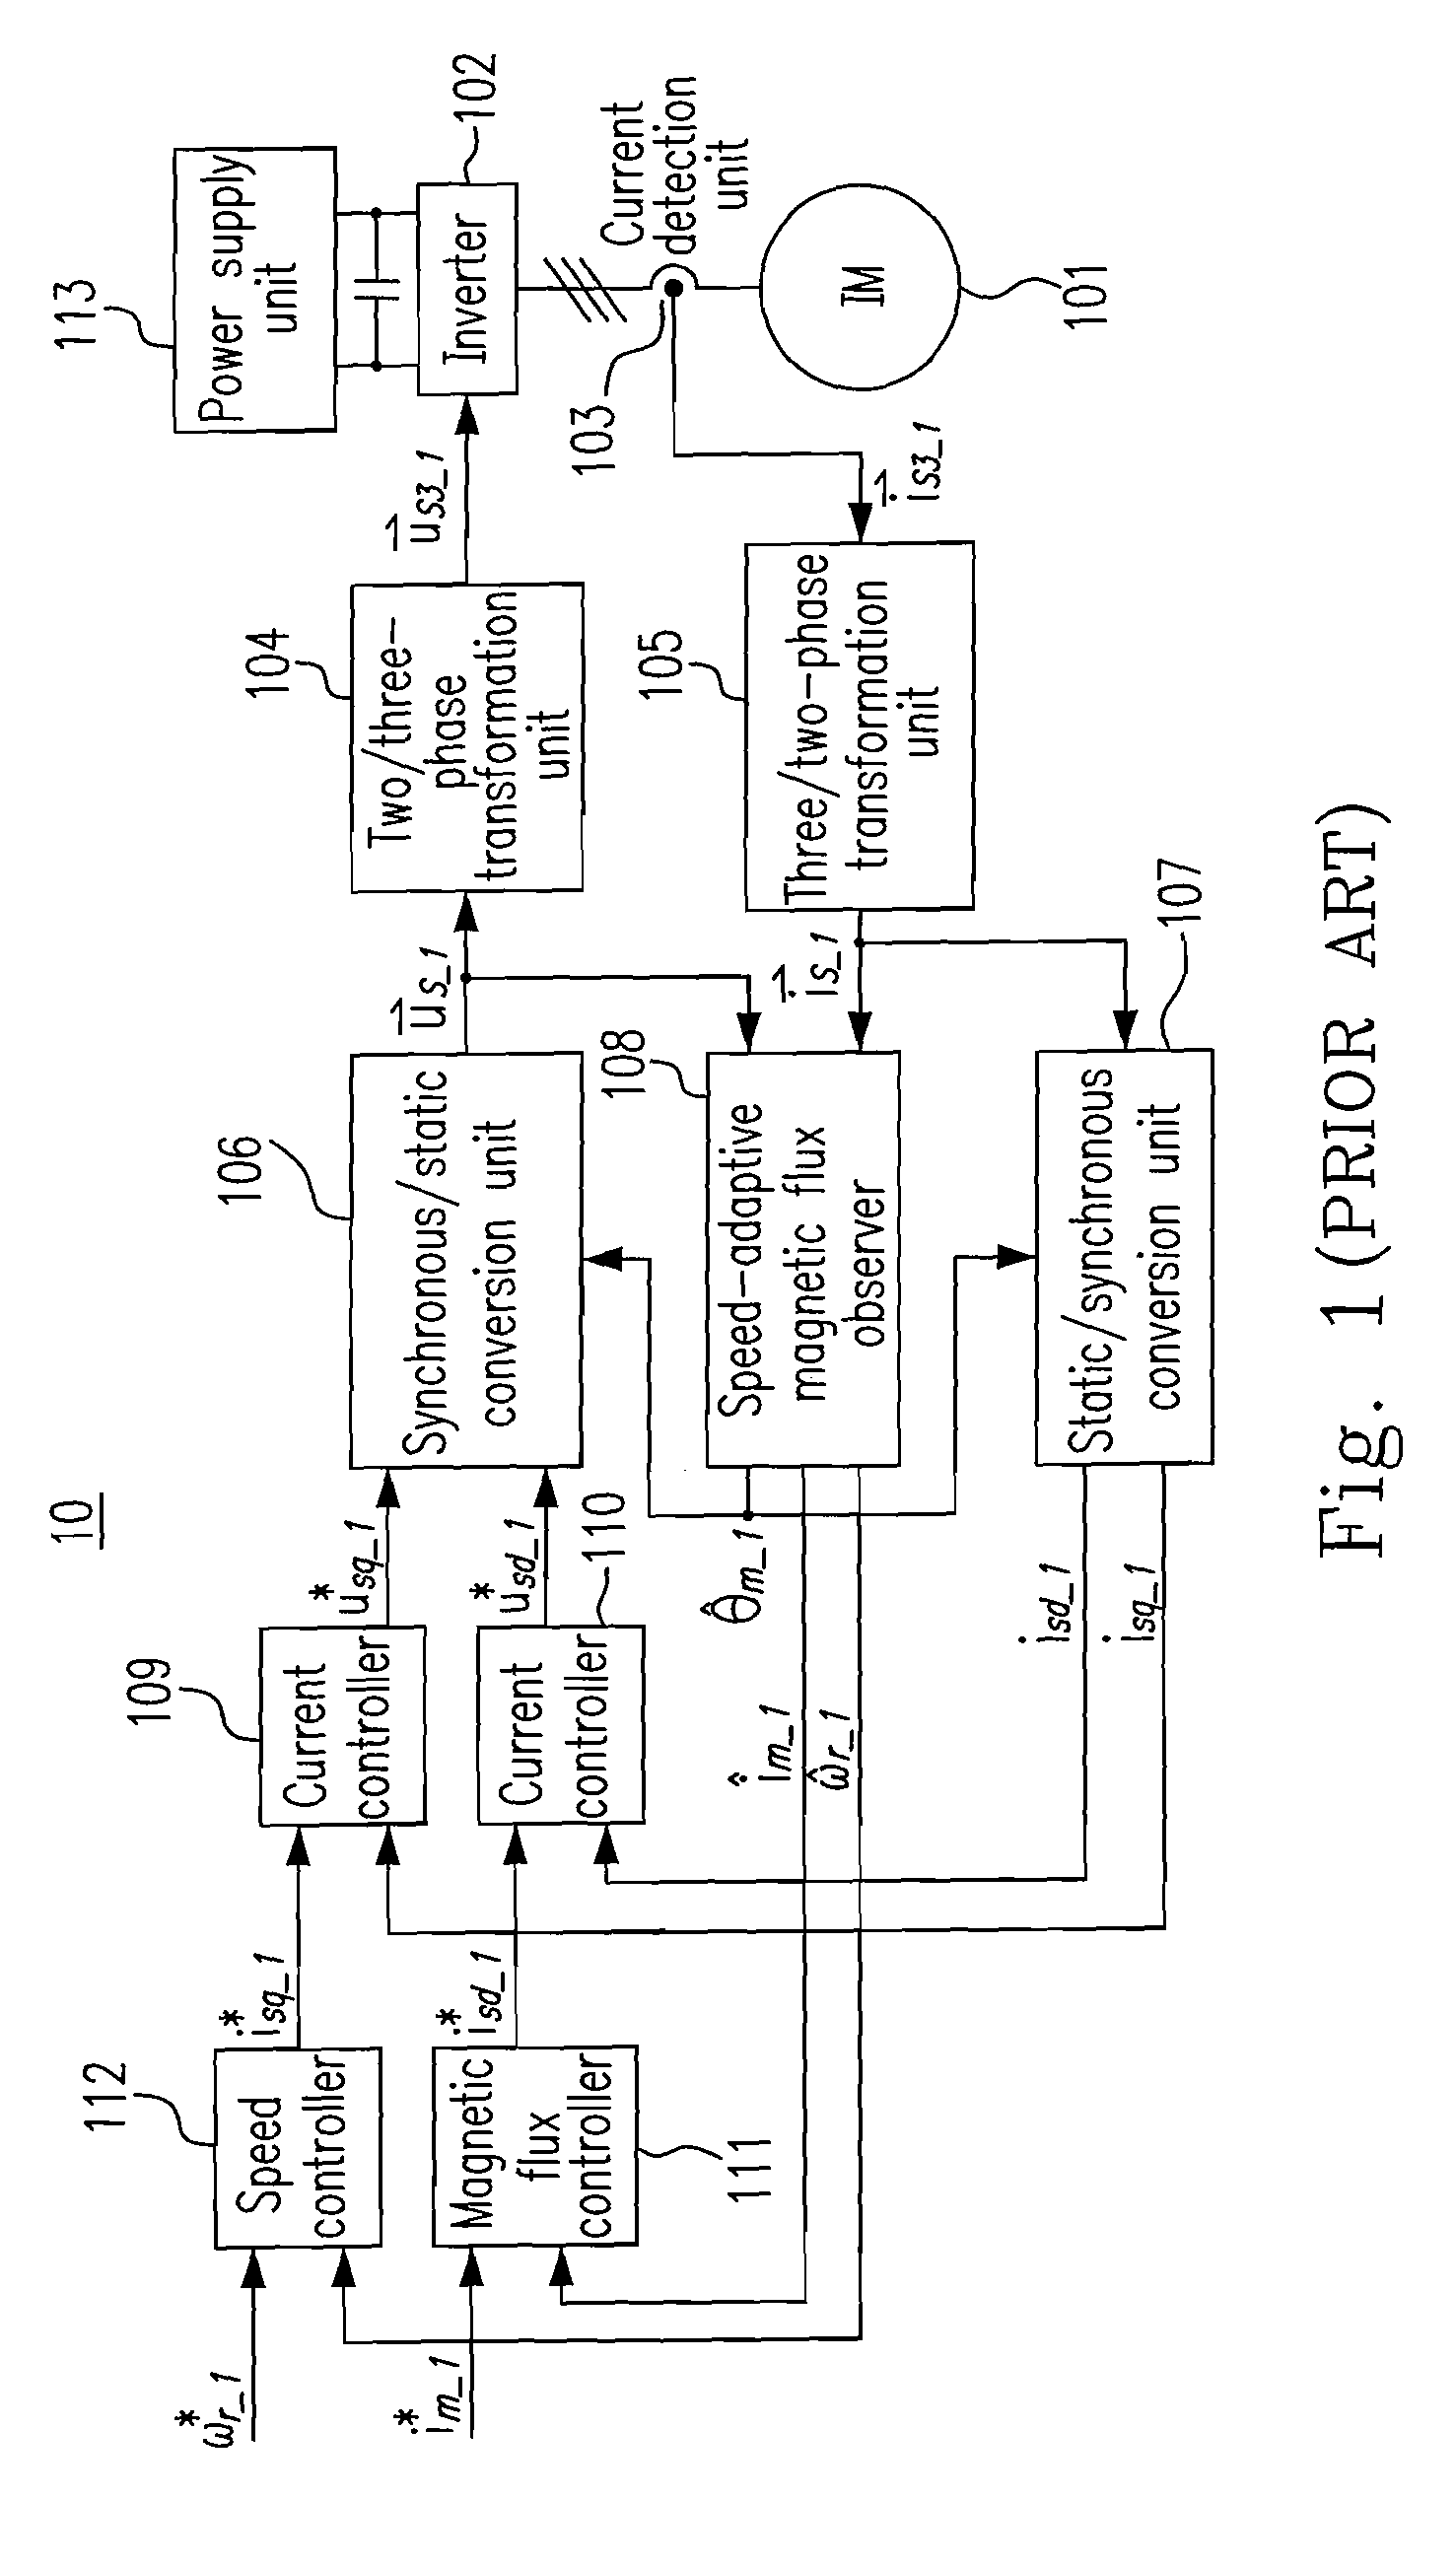 Sensorless control apparatus and method for induction motor